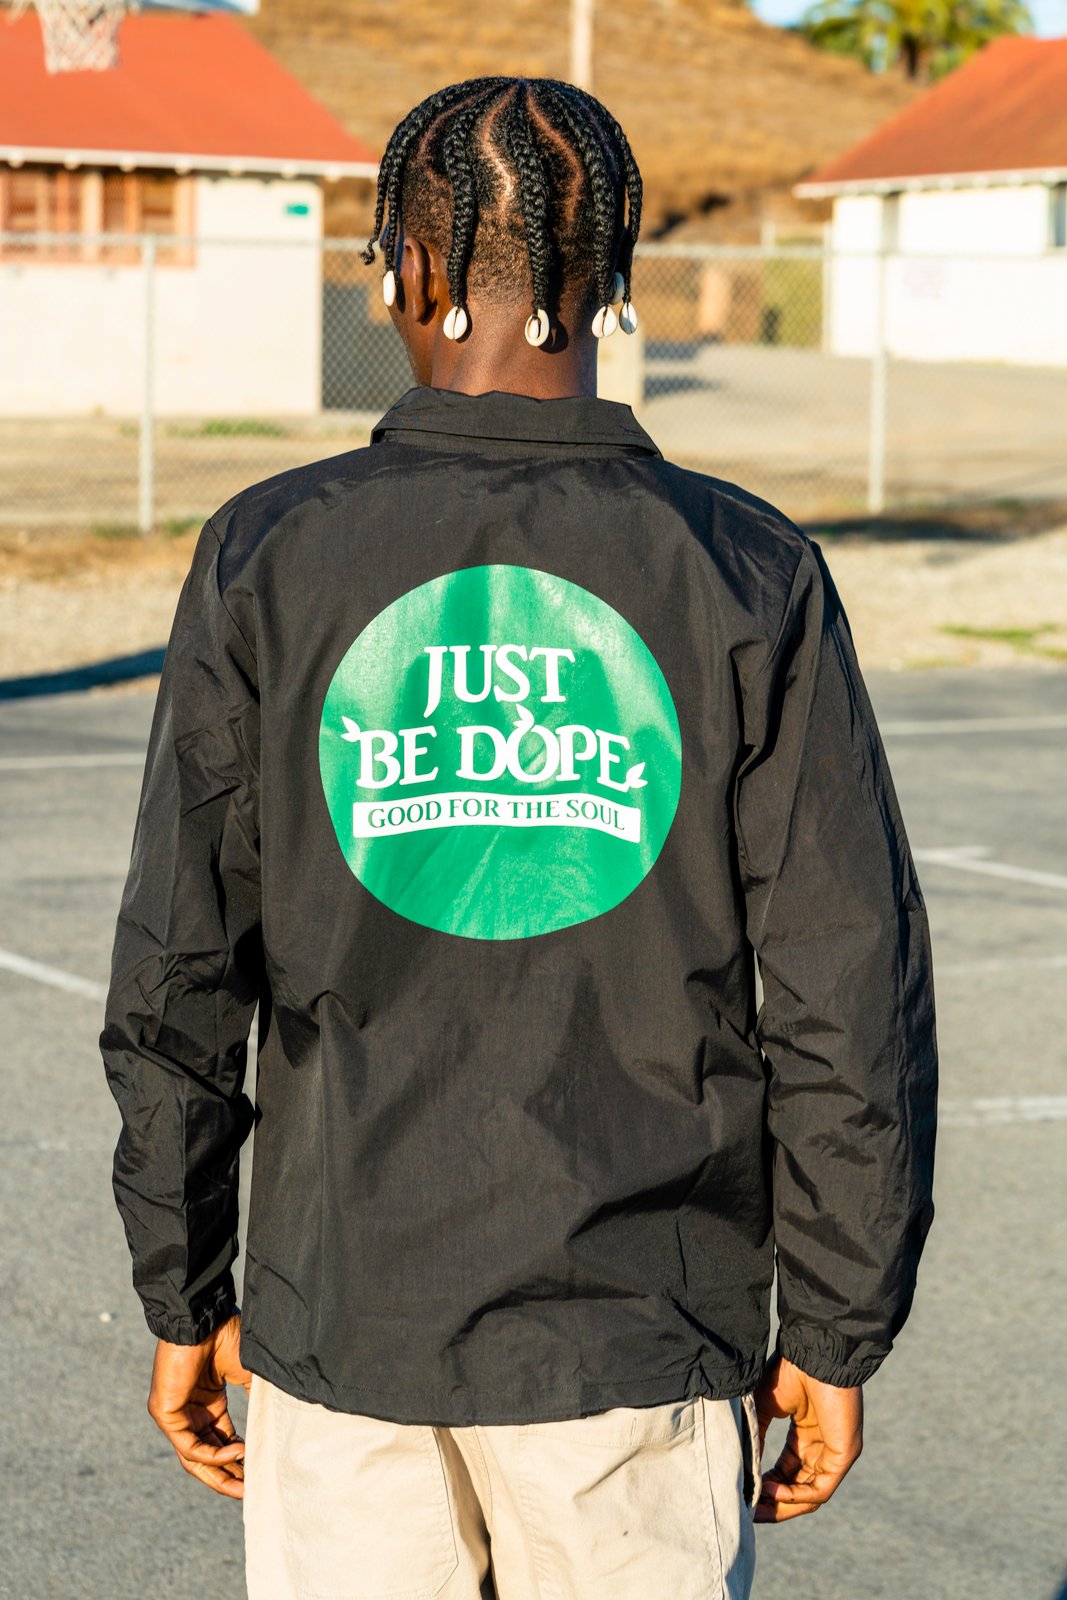 Exclusive Members Only Jacket / JustBeDope